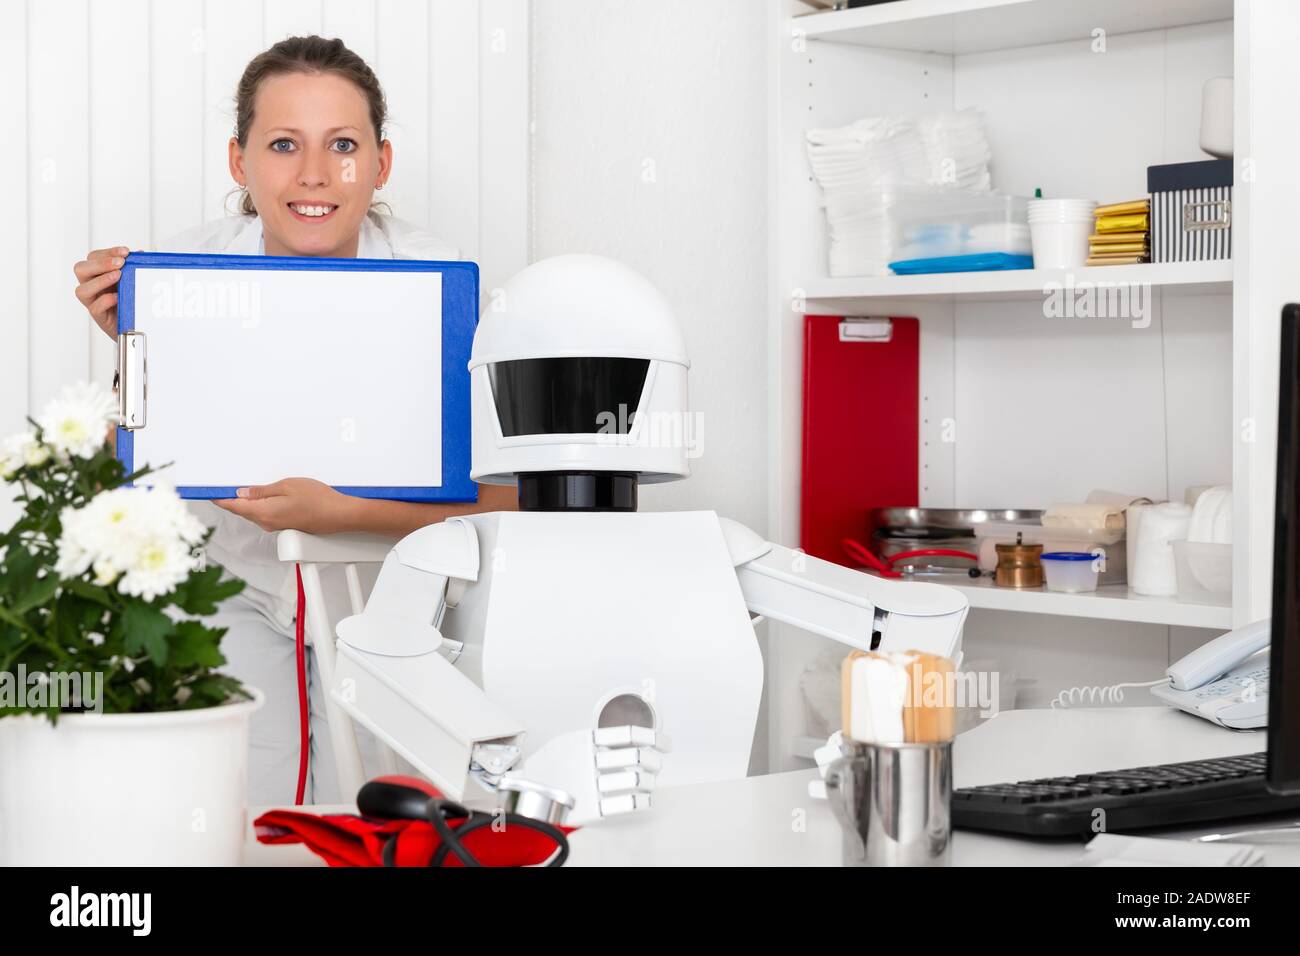 ai robot as professional doctor in his office, sitting behind the desktop, nurse or second female doctor with clipboard in her hands Stock Photo